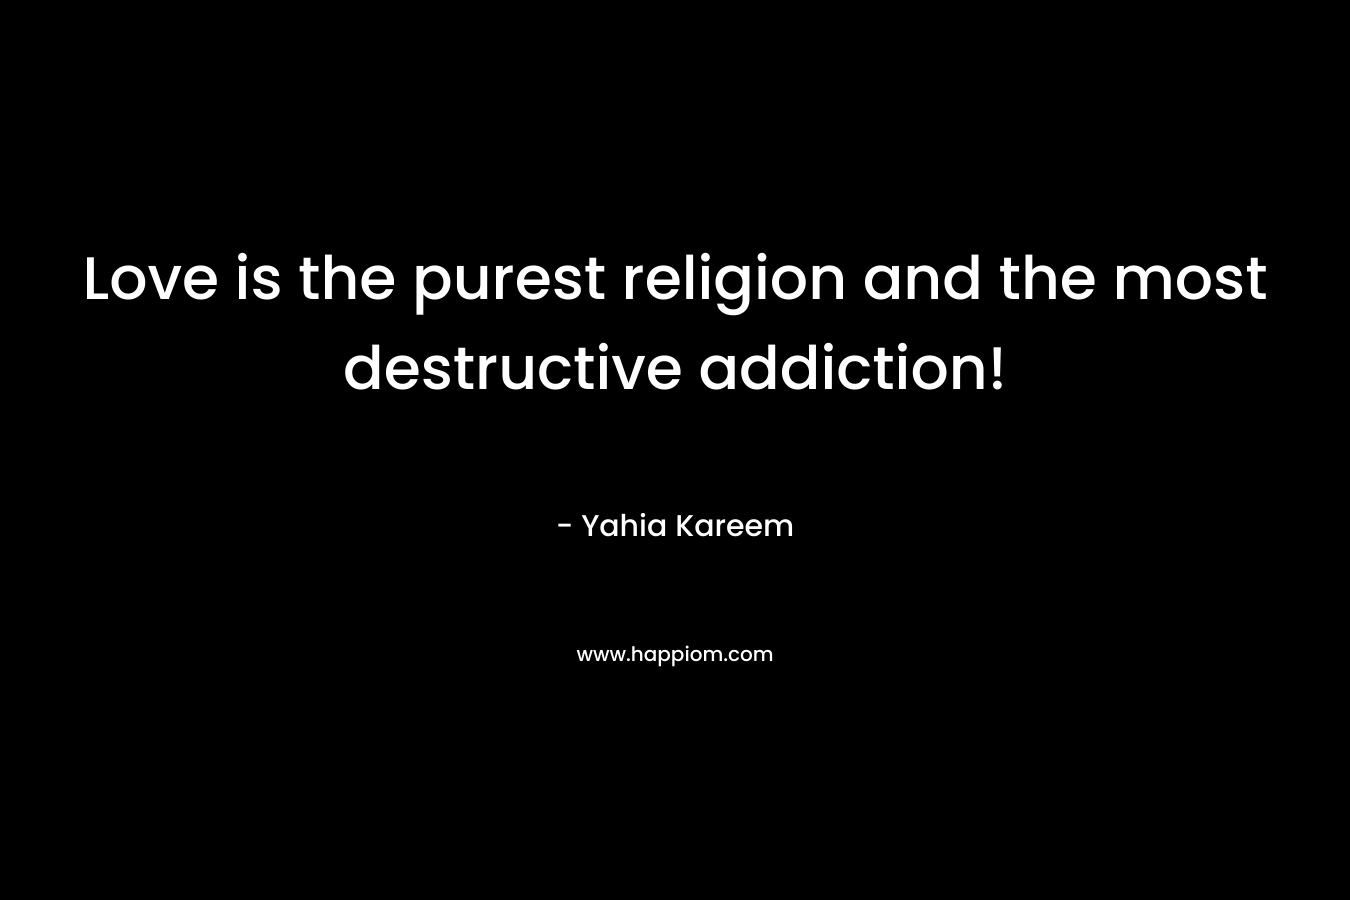 Love is the purest religion and the most destructive addiction! – Yahia Kareem